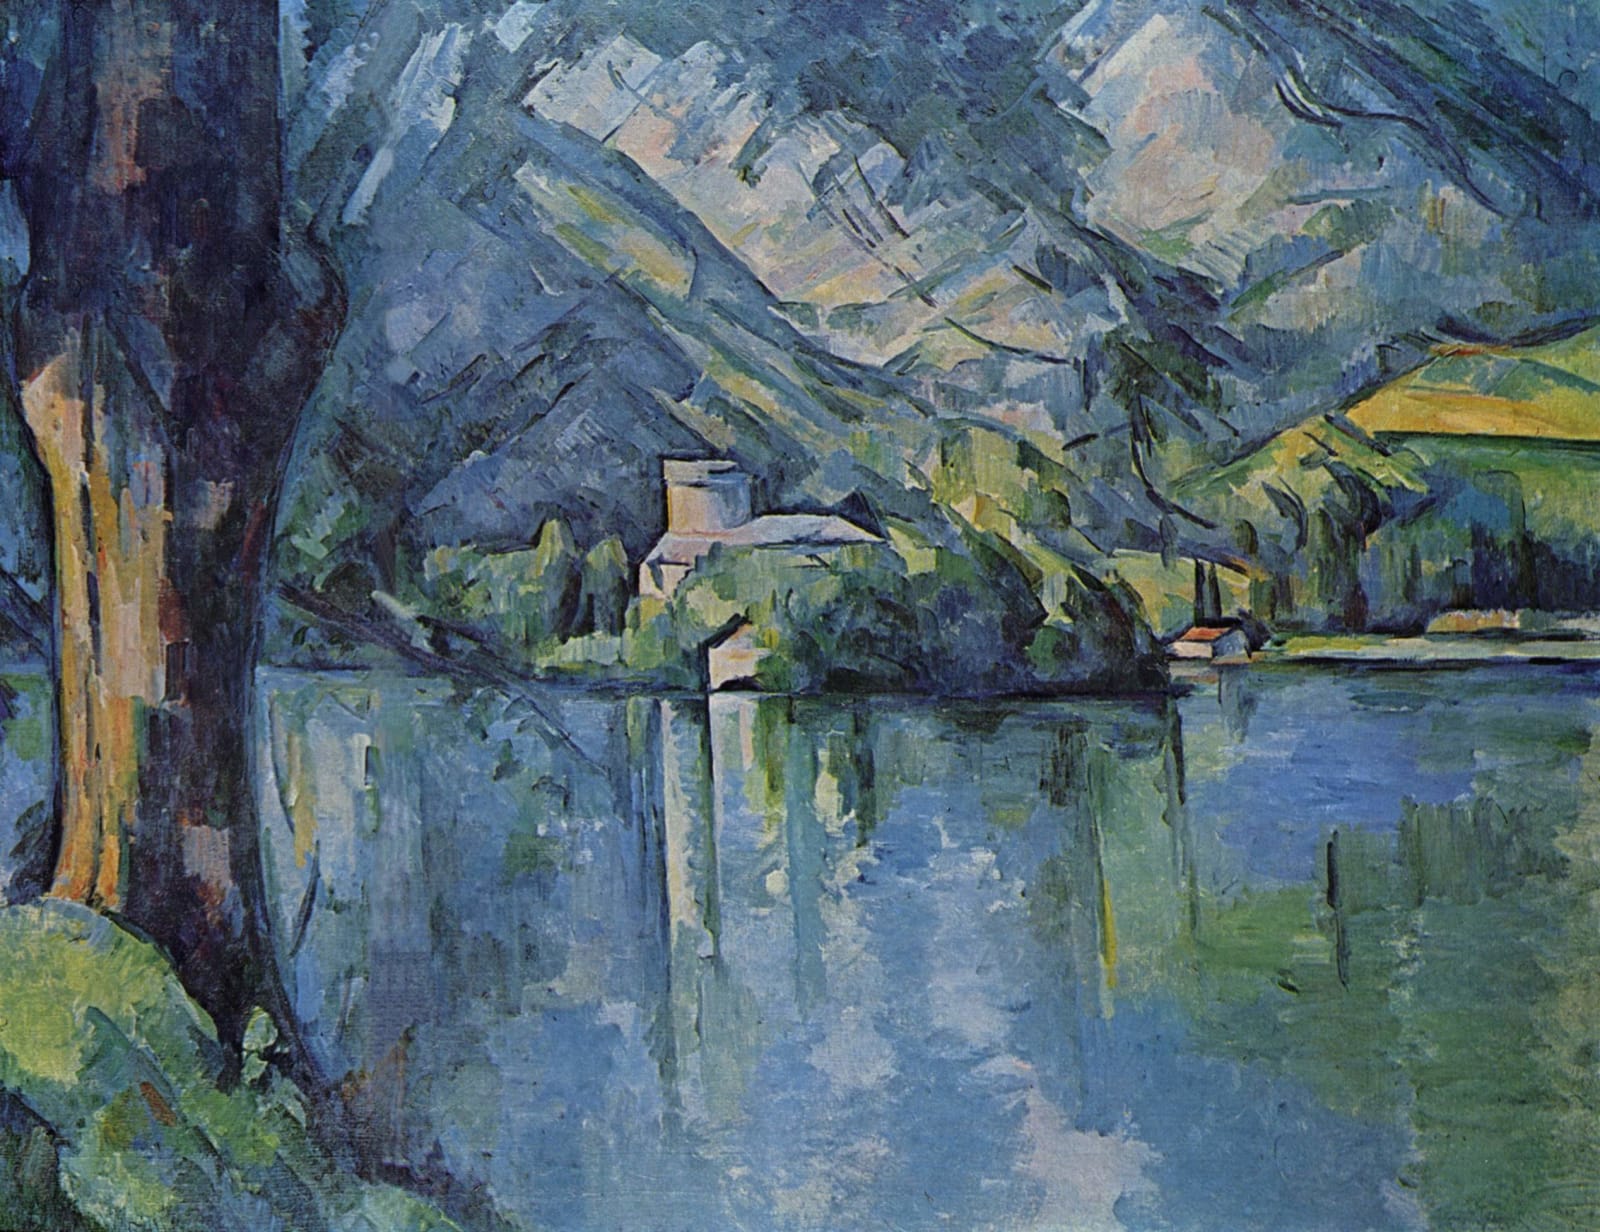 Paul Cézanne Lac d’Annecy 1896 Collection of the Courtauld Institute of Art, London